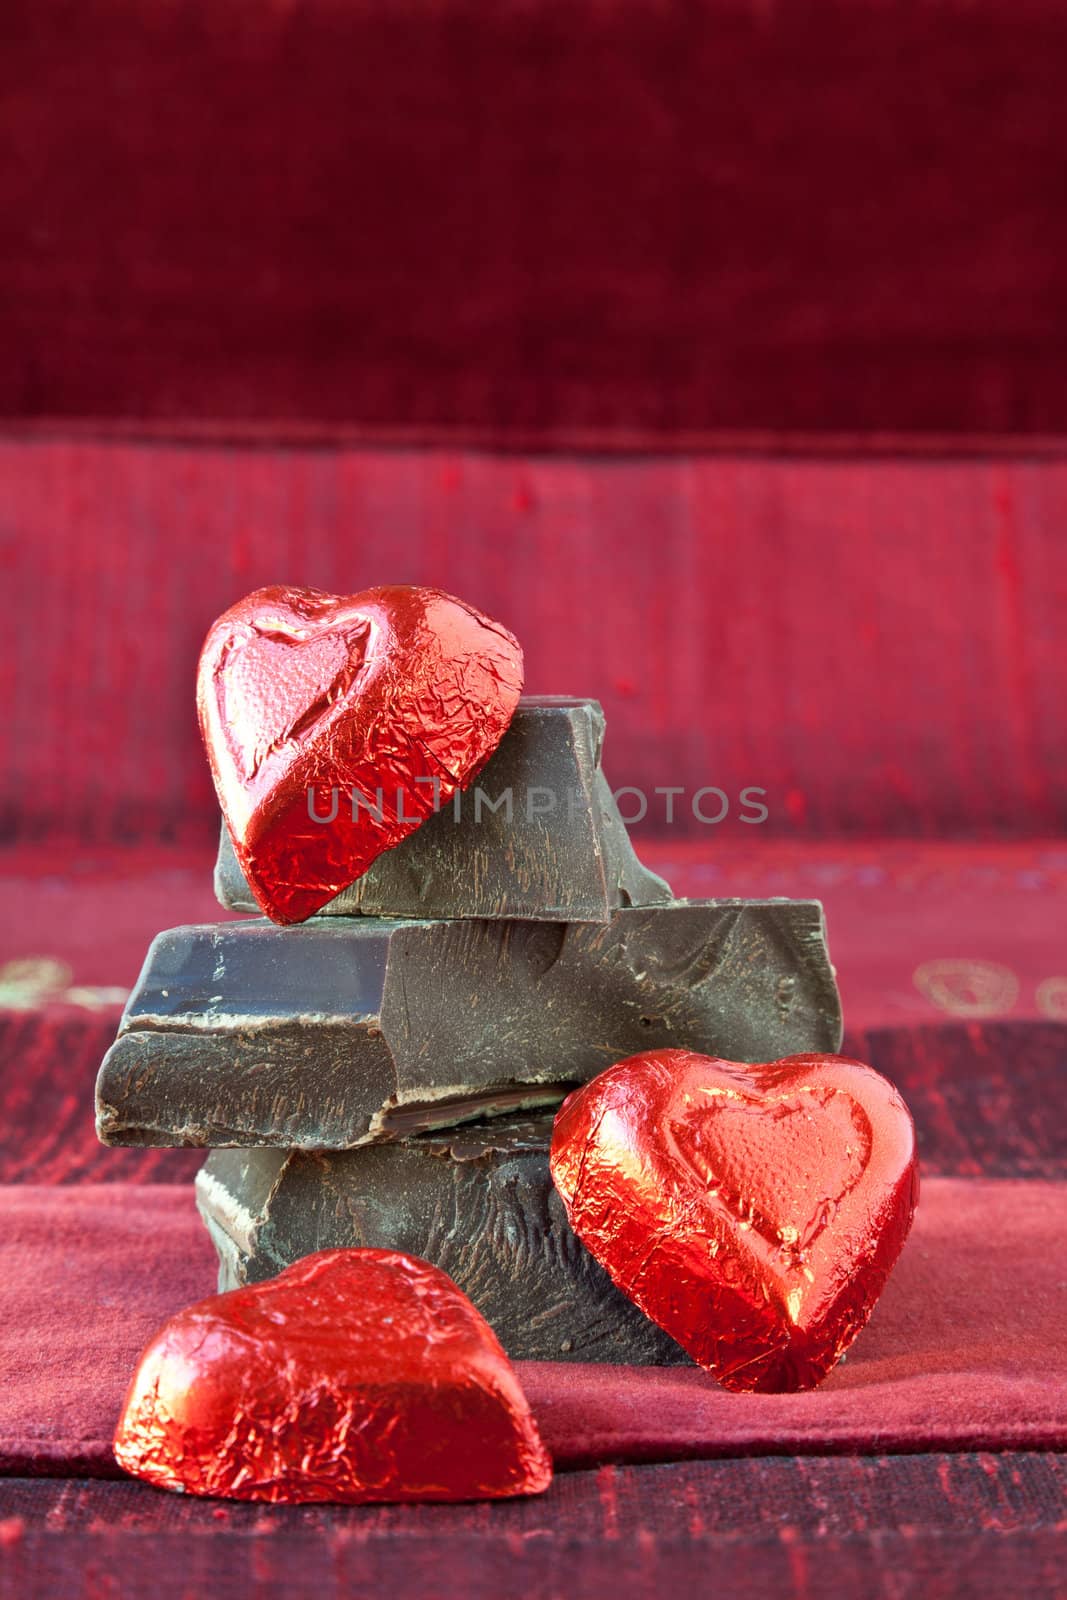 Red foil wrapped candy hearts arranged on top of pile of gourmet thick dark chocolate bar chunks. Red textured background.